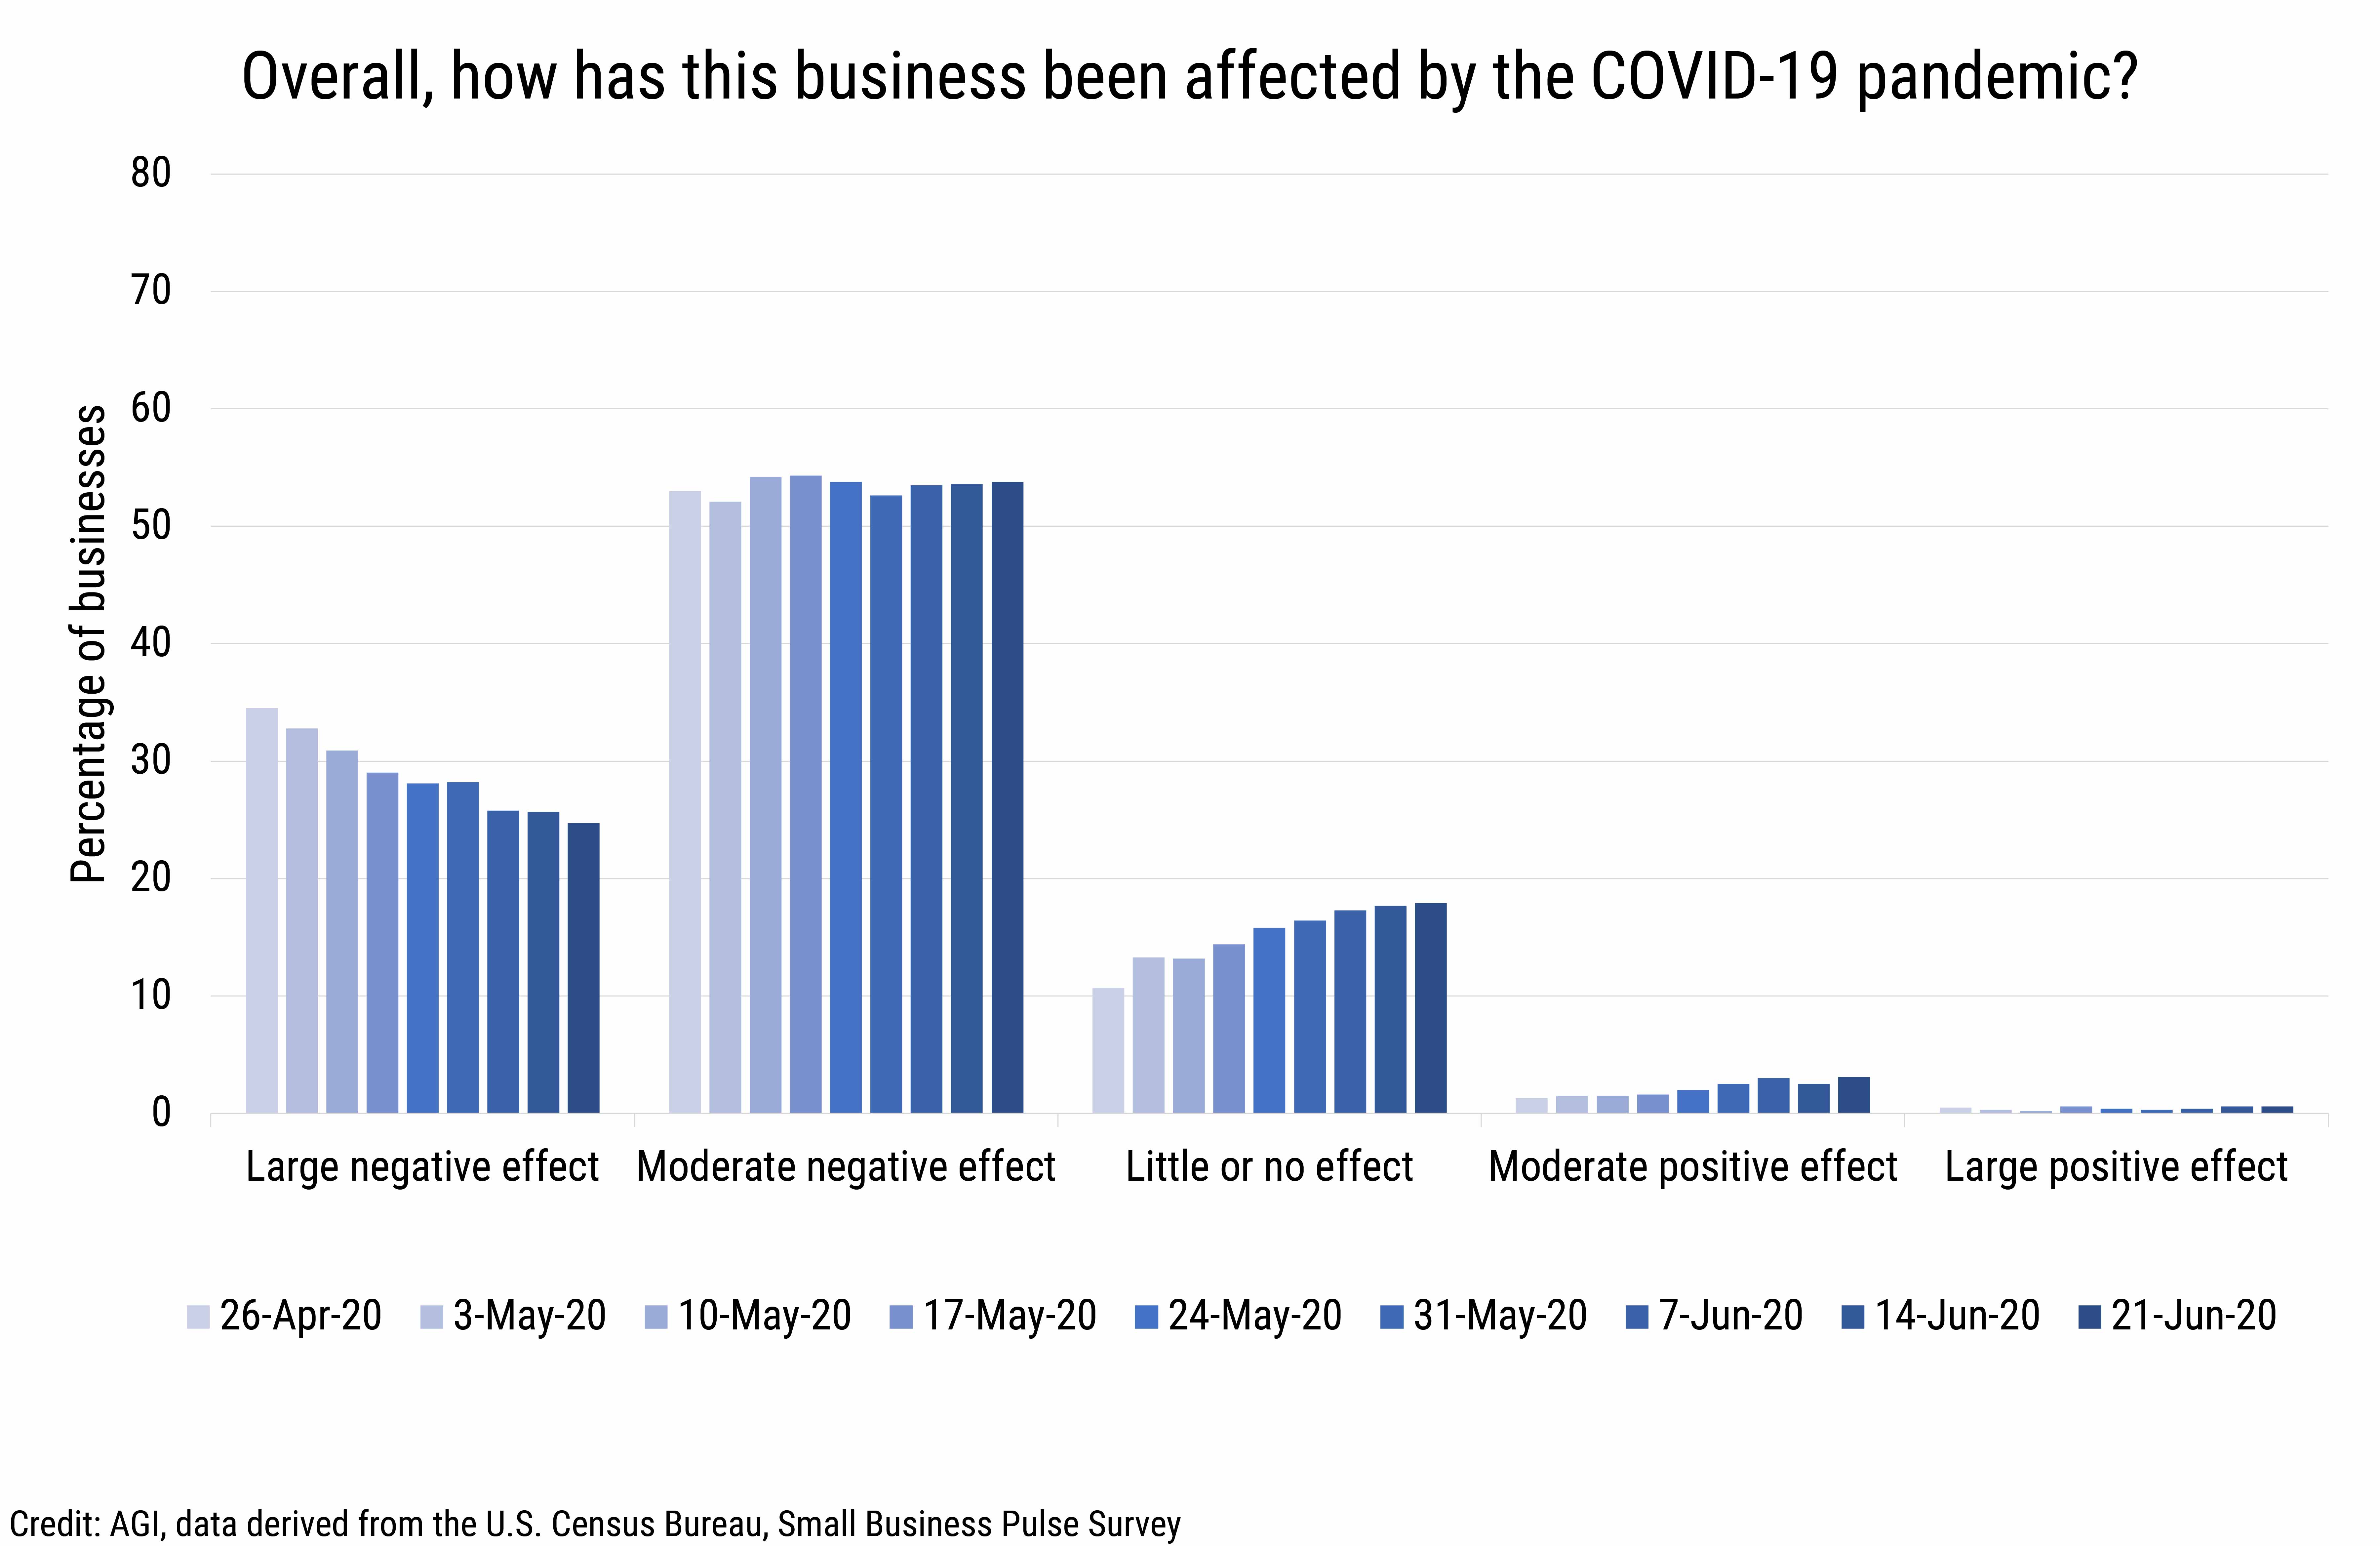 DB_2020-014 chart 01: Overall COVID-19 impacts to businesses (credit: AGI, data derived from the U.S. Census Bureau, Small Business Pulse Survey)